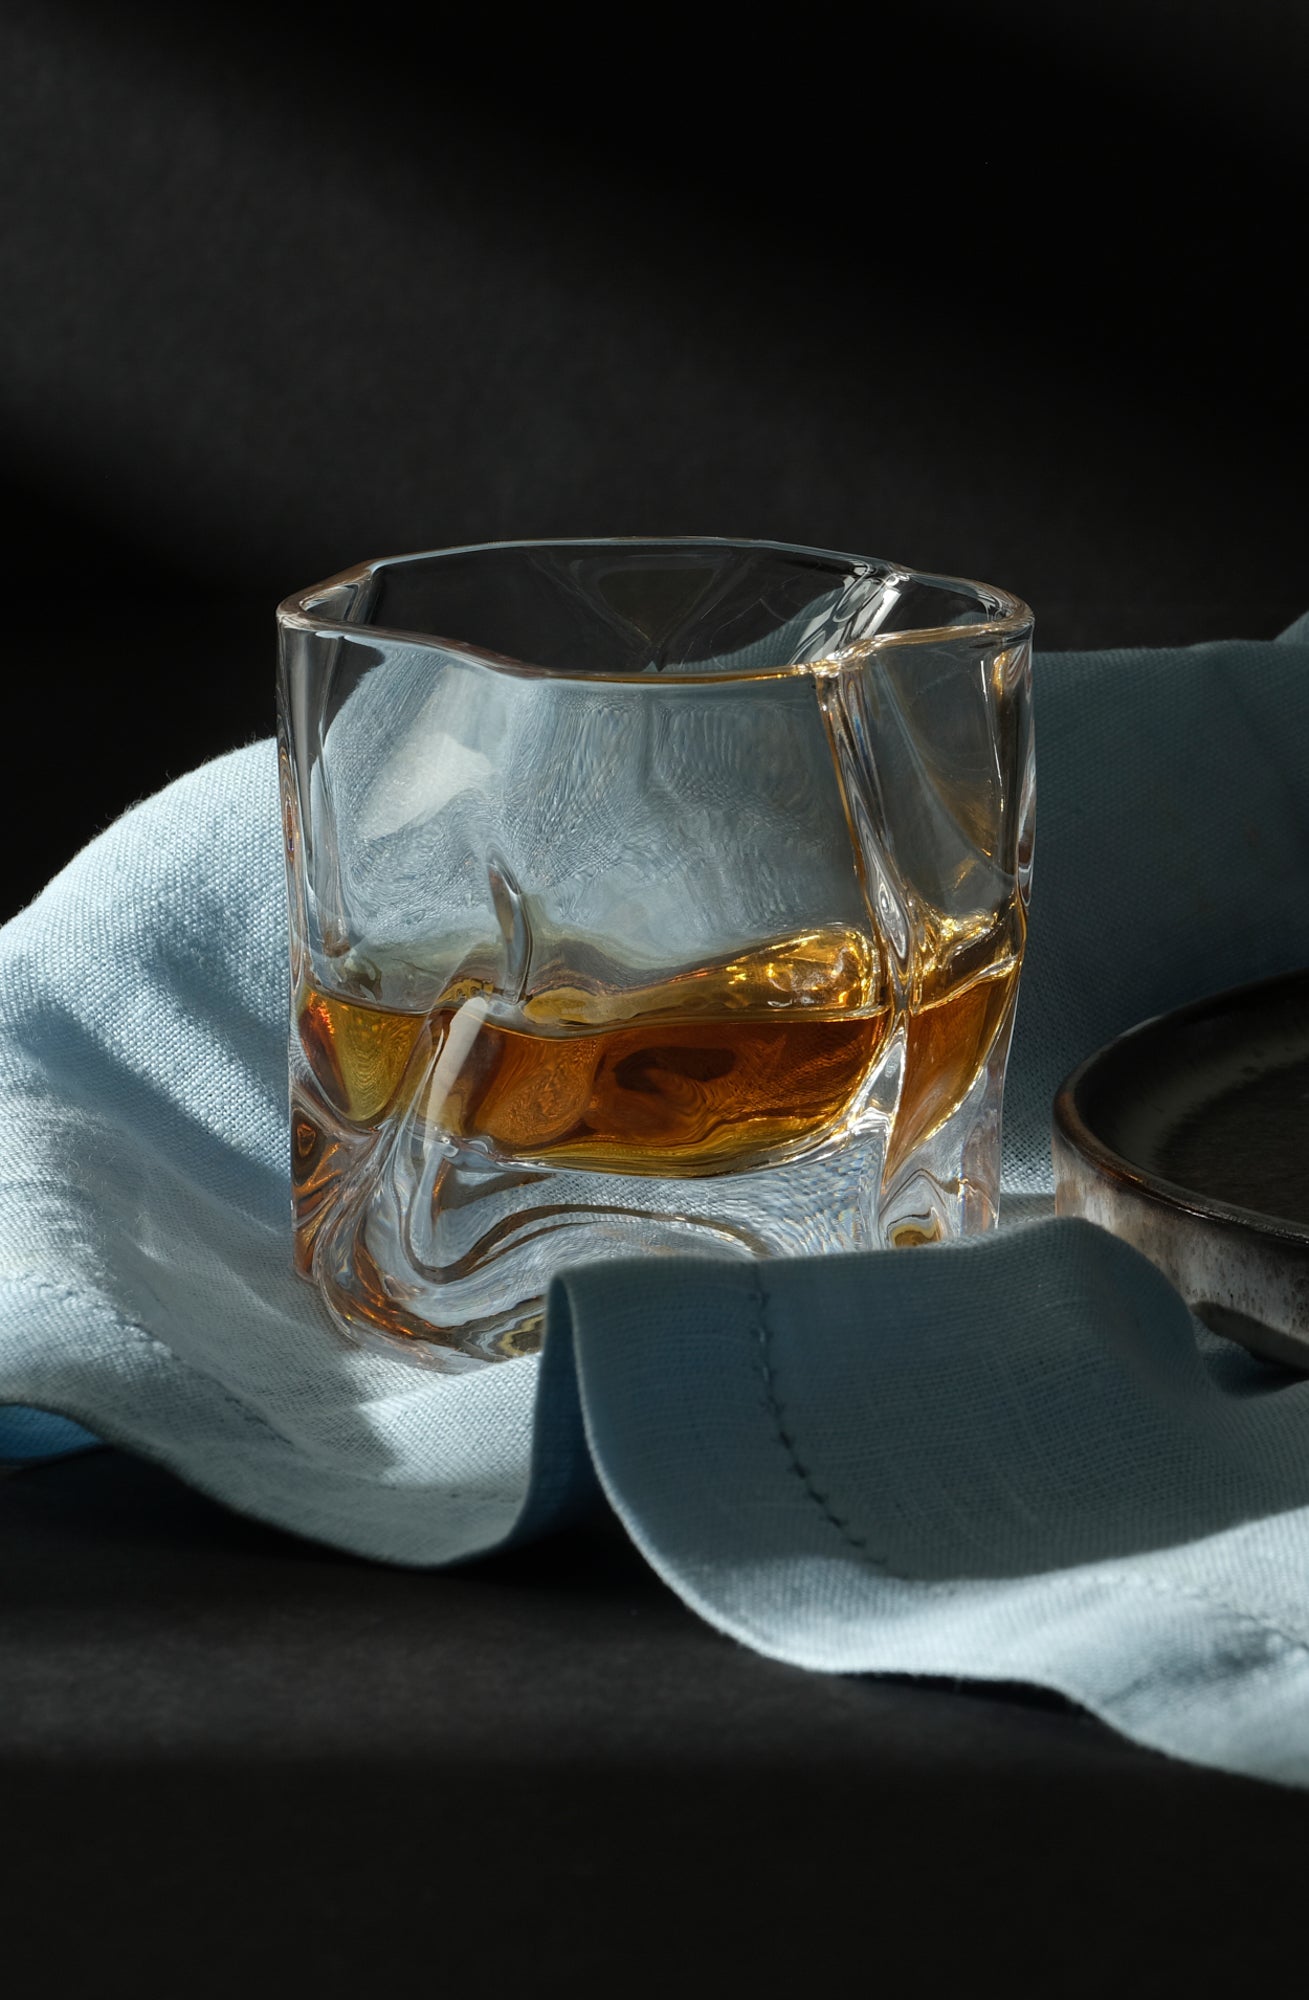 A Malt & Brew Whisky Wave Glass with a shot of whisky sits on a blue cloth.